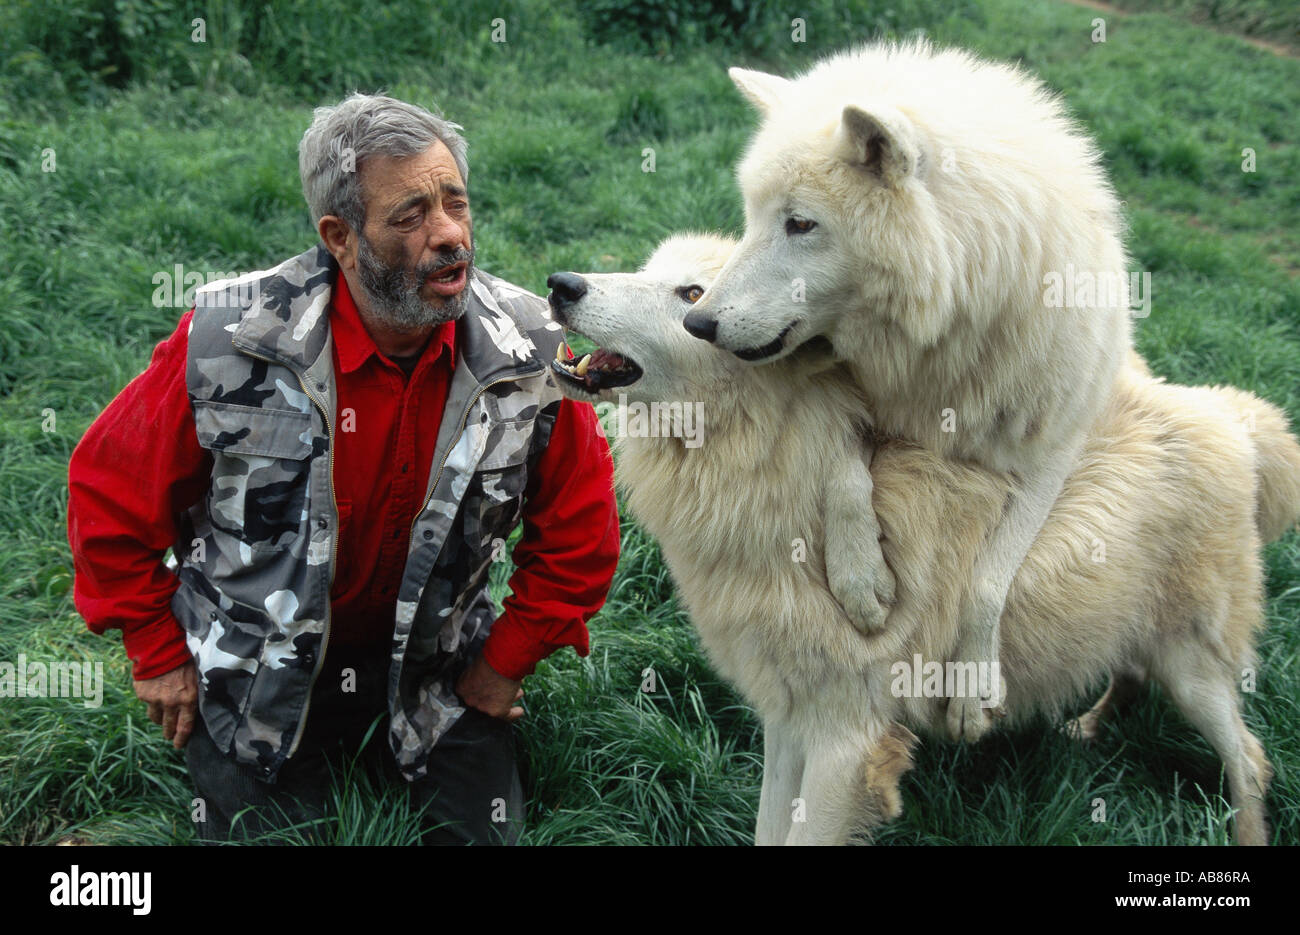 arctic wolf, tundra wolf (Canis lupus albus), Werner Freund with wolves; keen welcoming, Germany, Saarland, Merzig Stock Photo